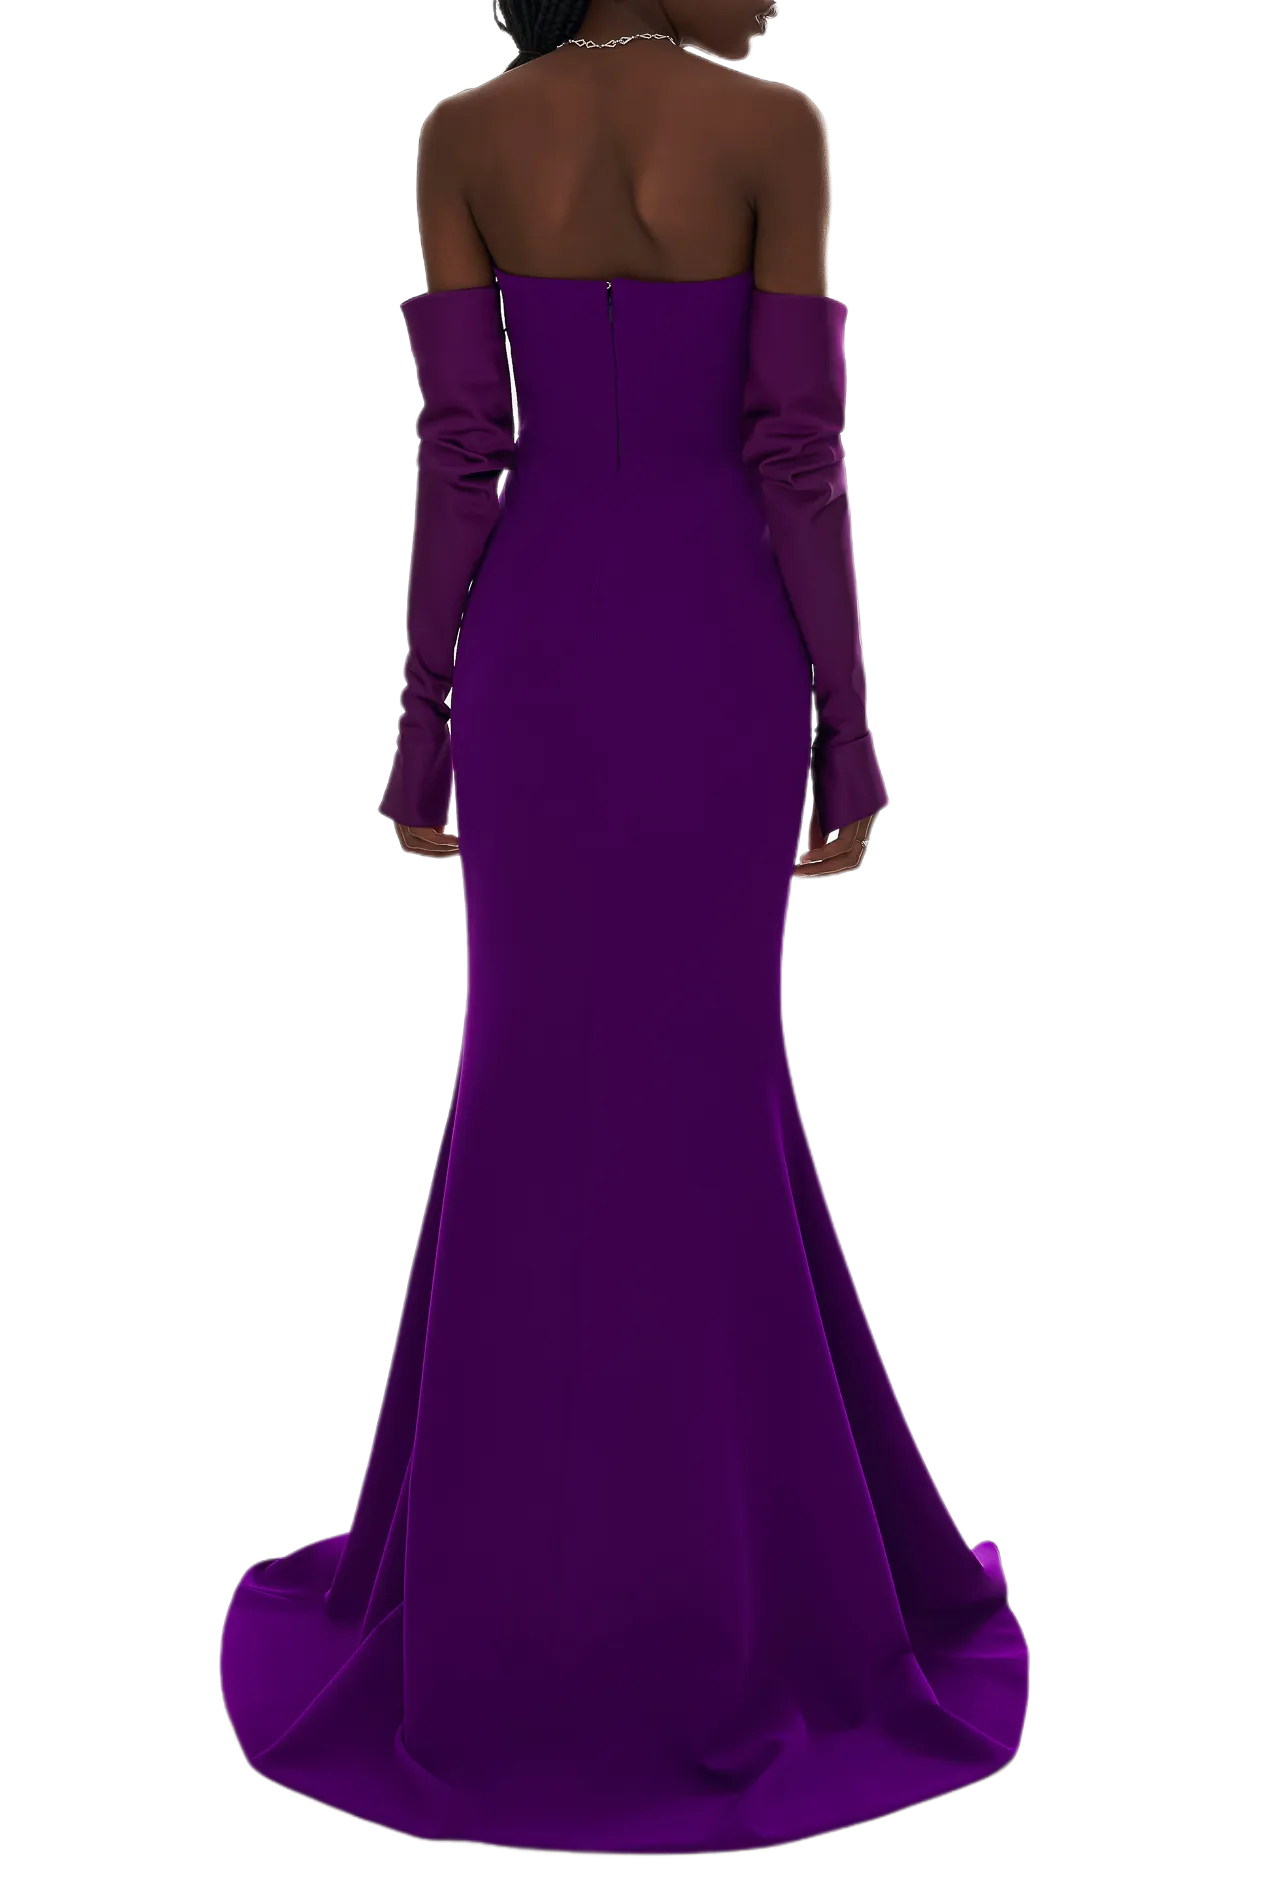 Raven Gown